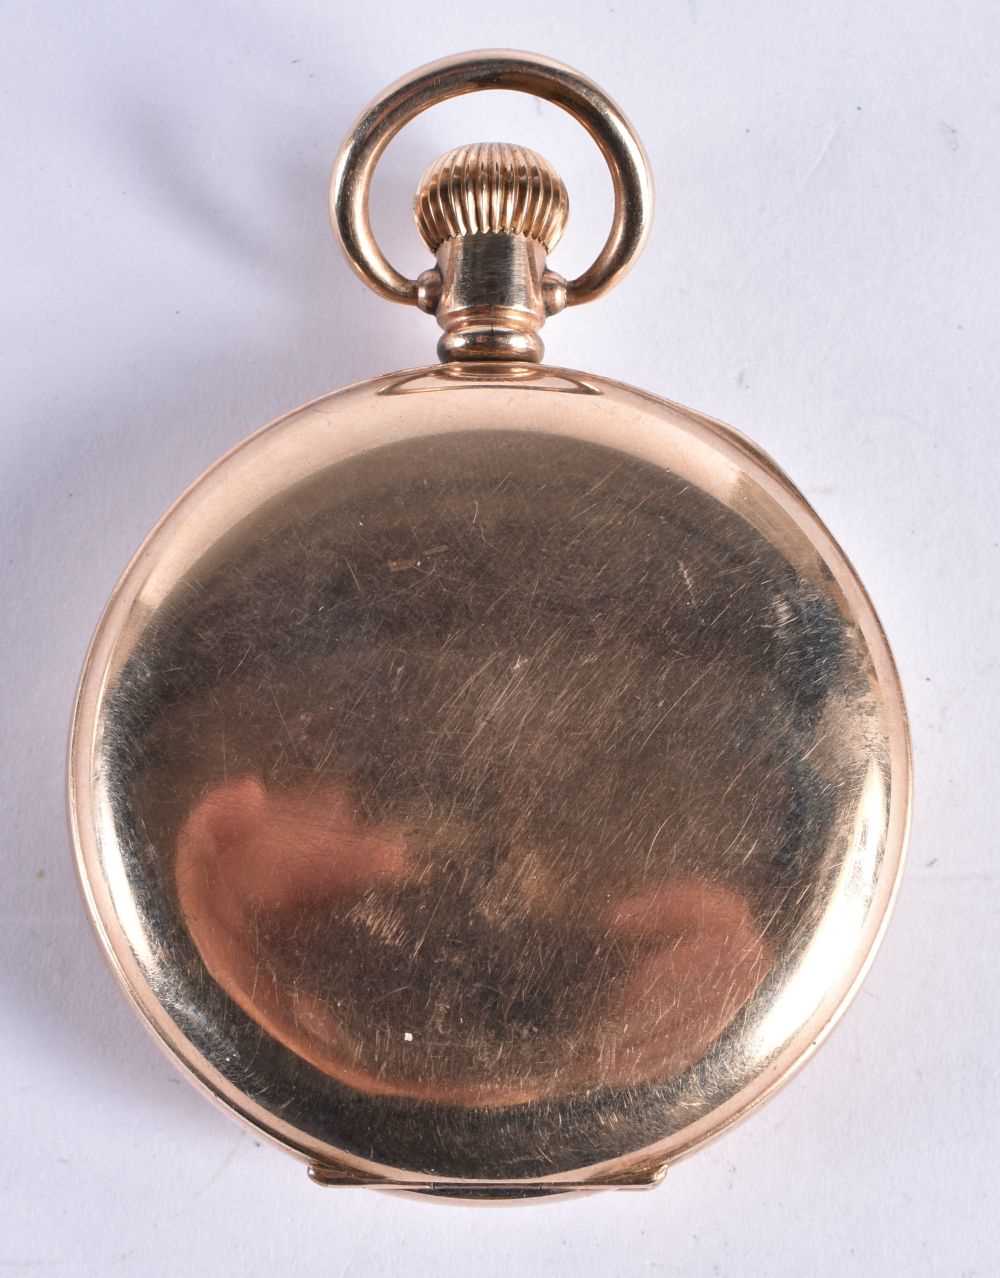 WALTHAM Gents Rolled Gold Full Hunter Pocket Watch. Movement - Hand-wind. WORKING - Tested For Time. - Image 5 of 5